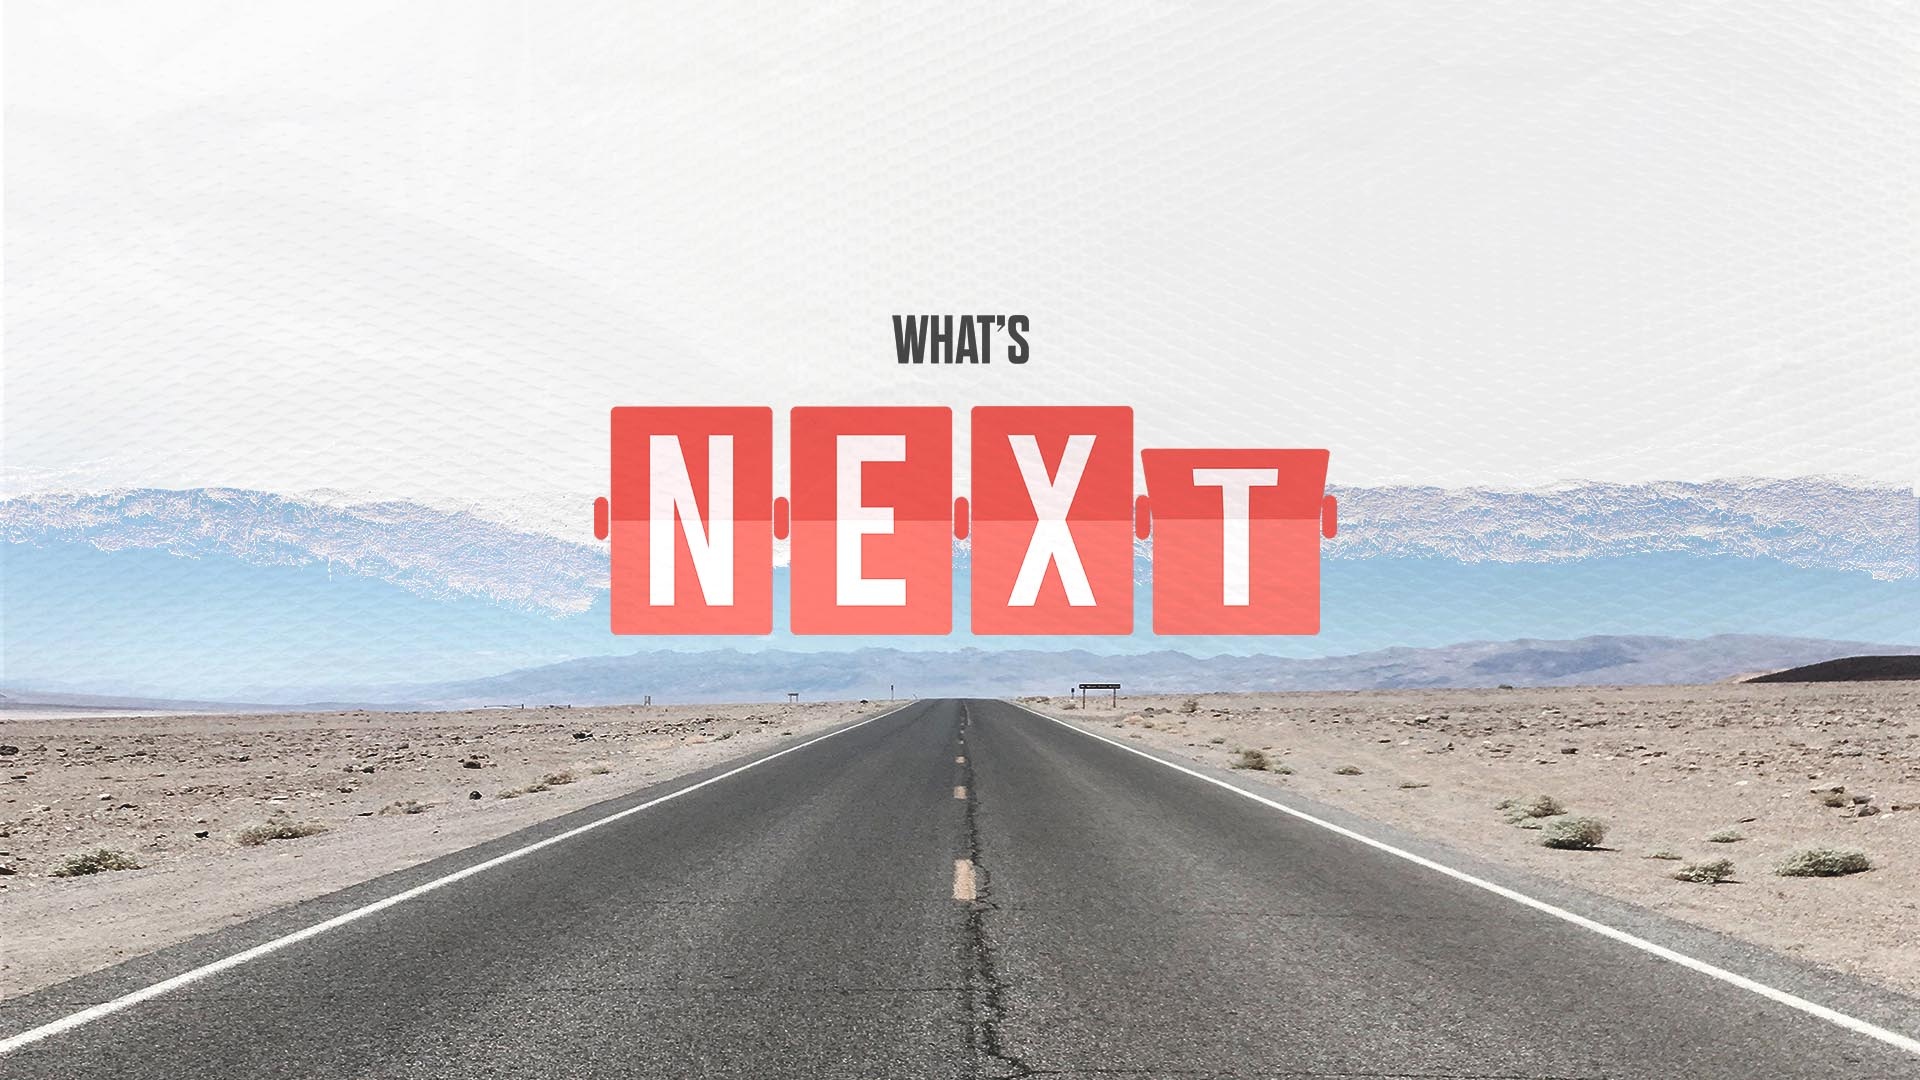 "What's Next" Message